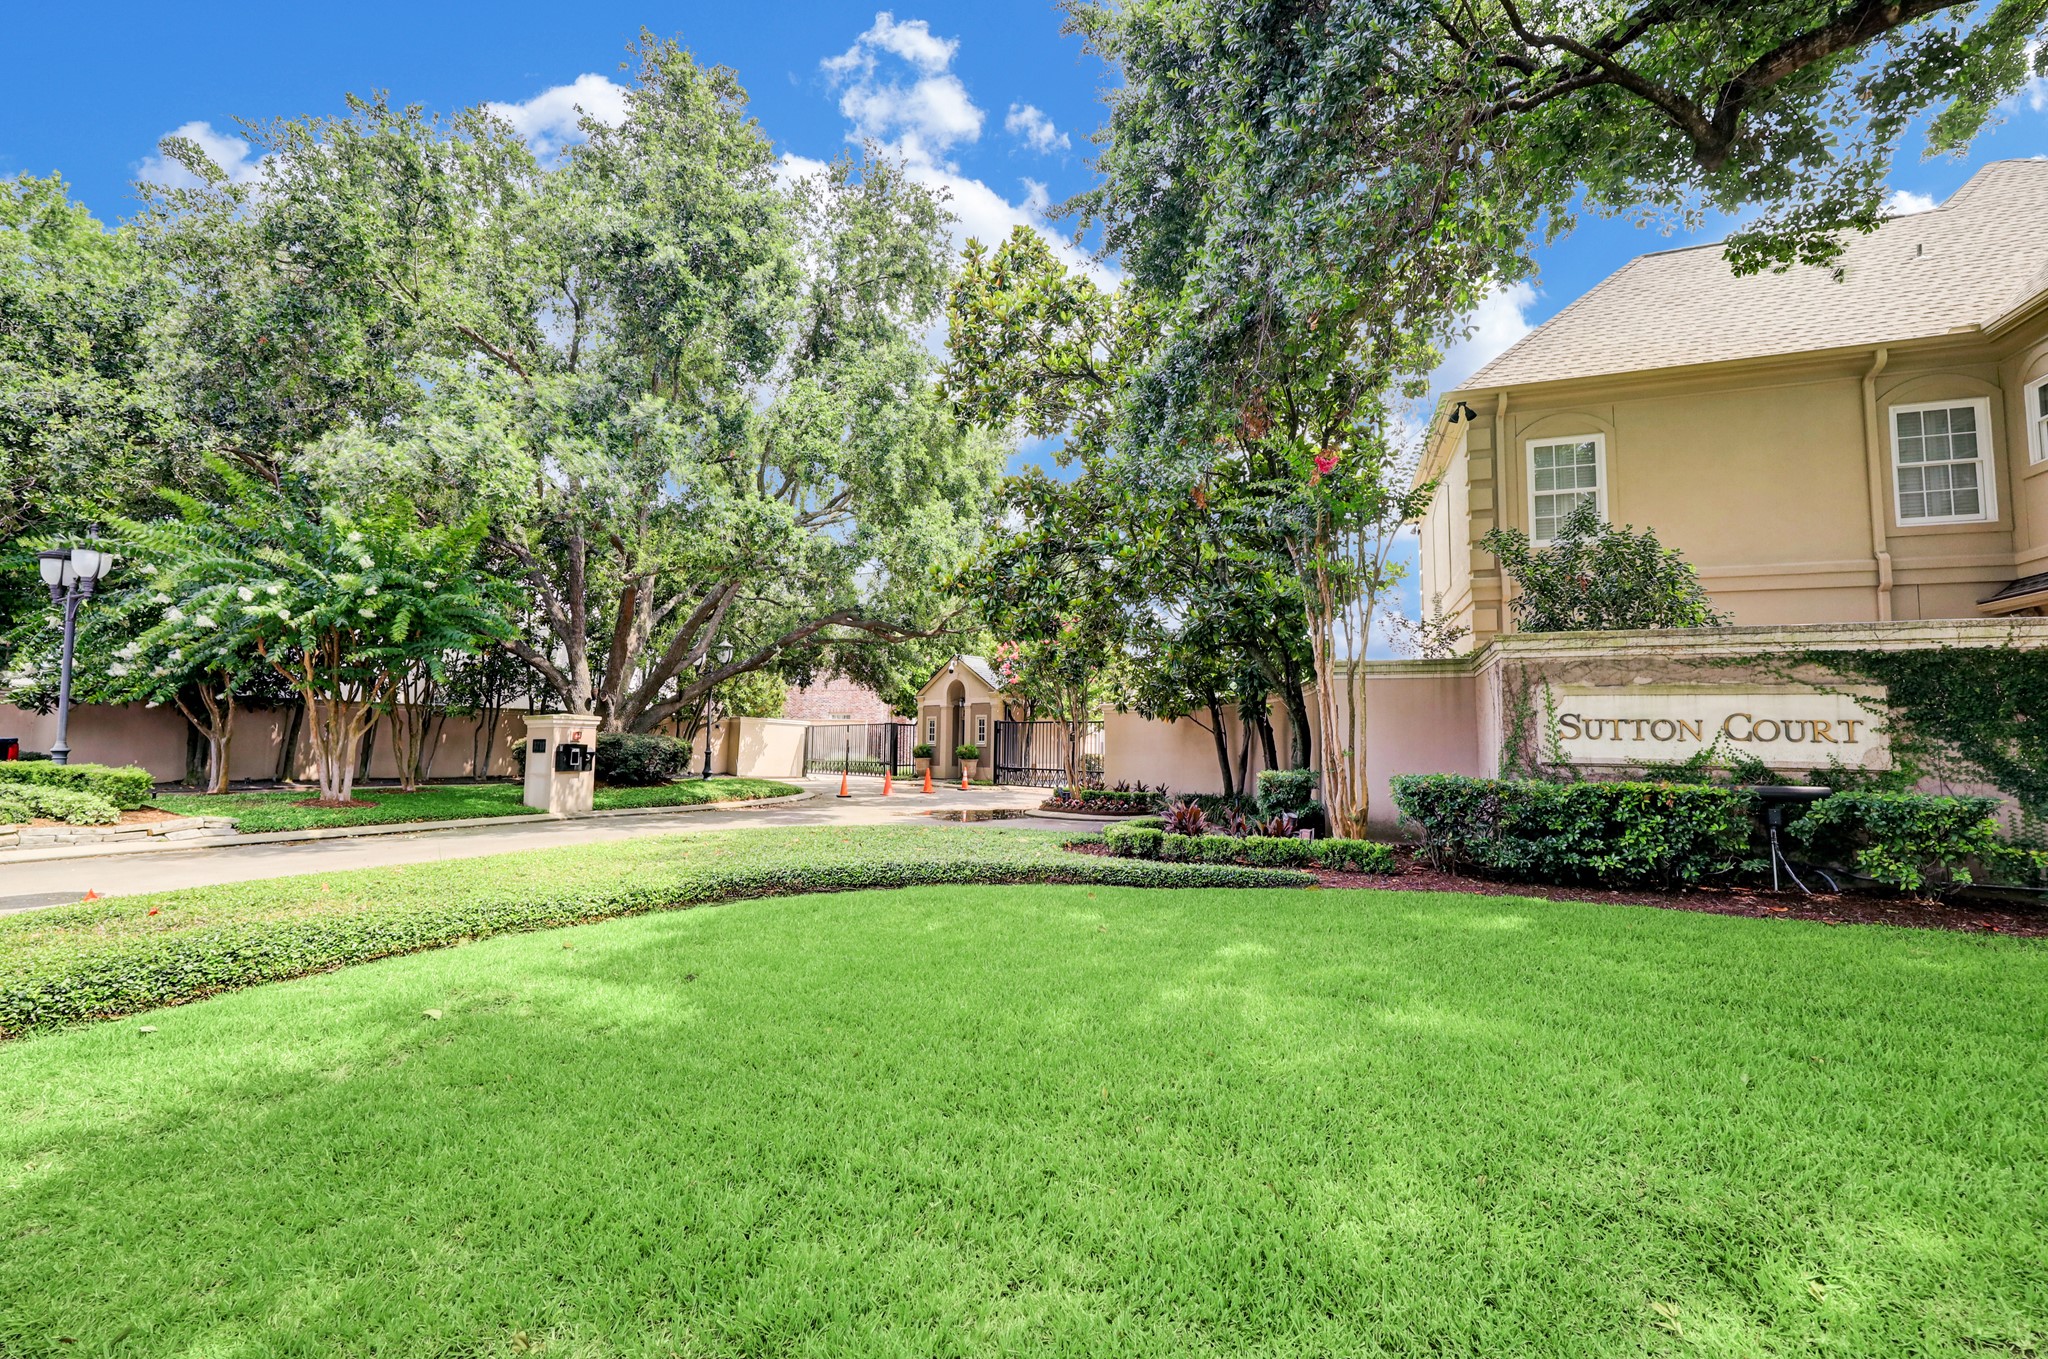 Sutton Court is a gated community in the Greenway Plaza area that offers courtesy patrol 6AM - 6PM, 24-hour video surveillance, common landscaping maintenance and a lovely neighborhood environment. 
